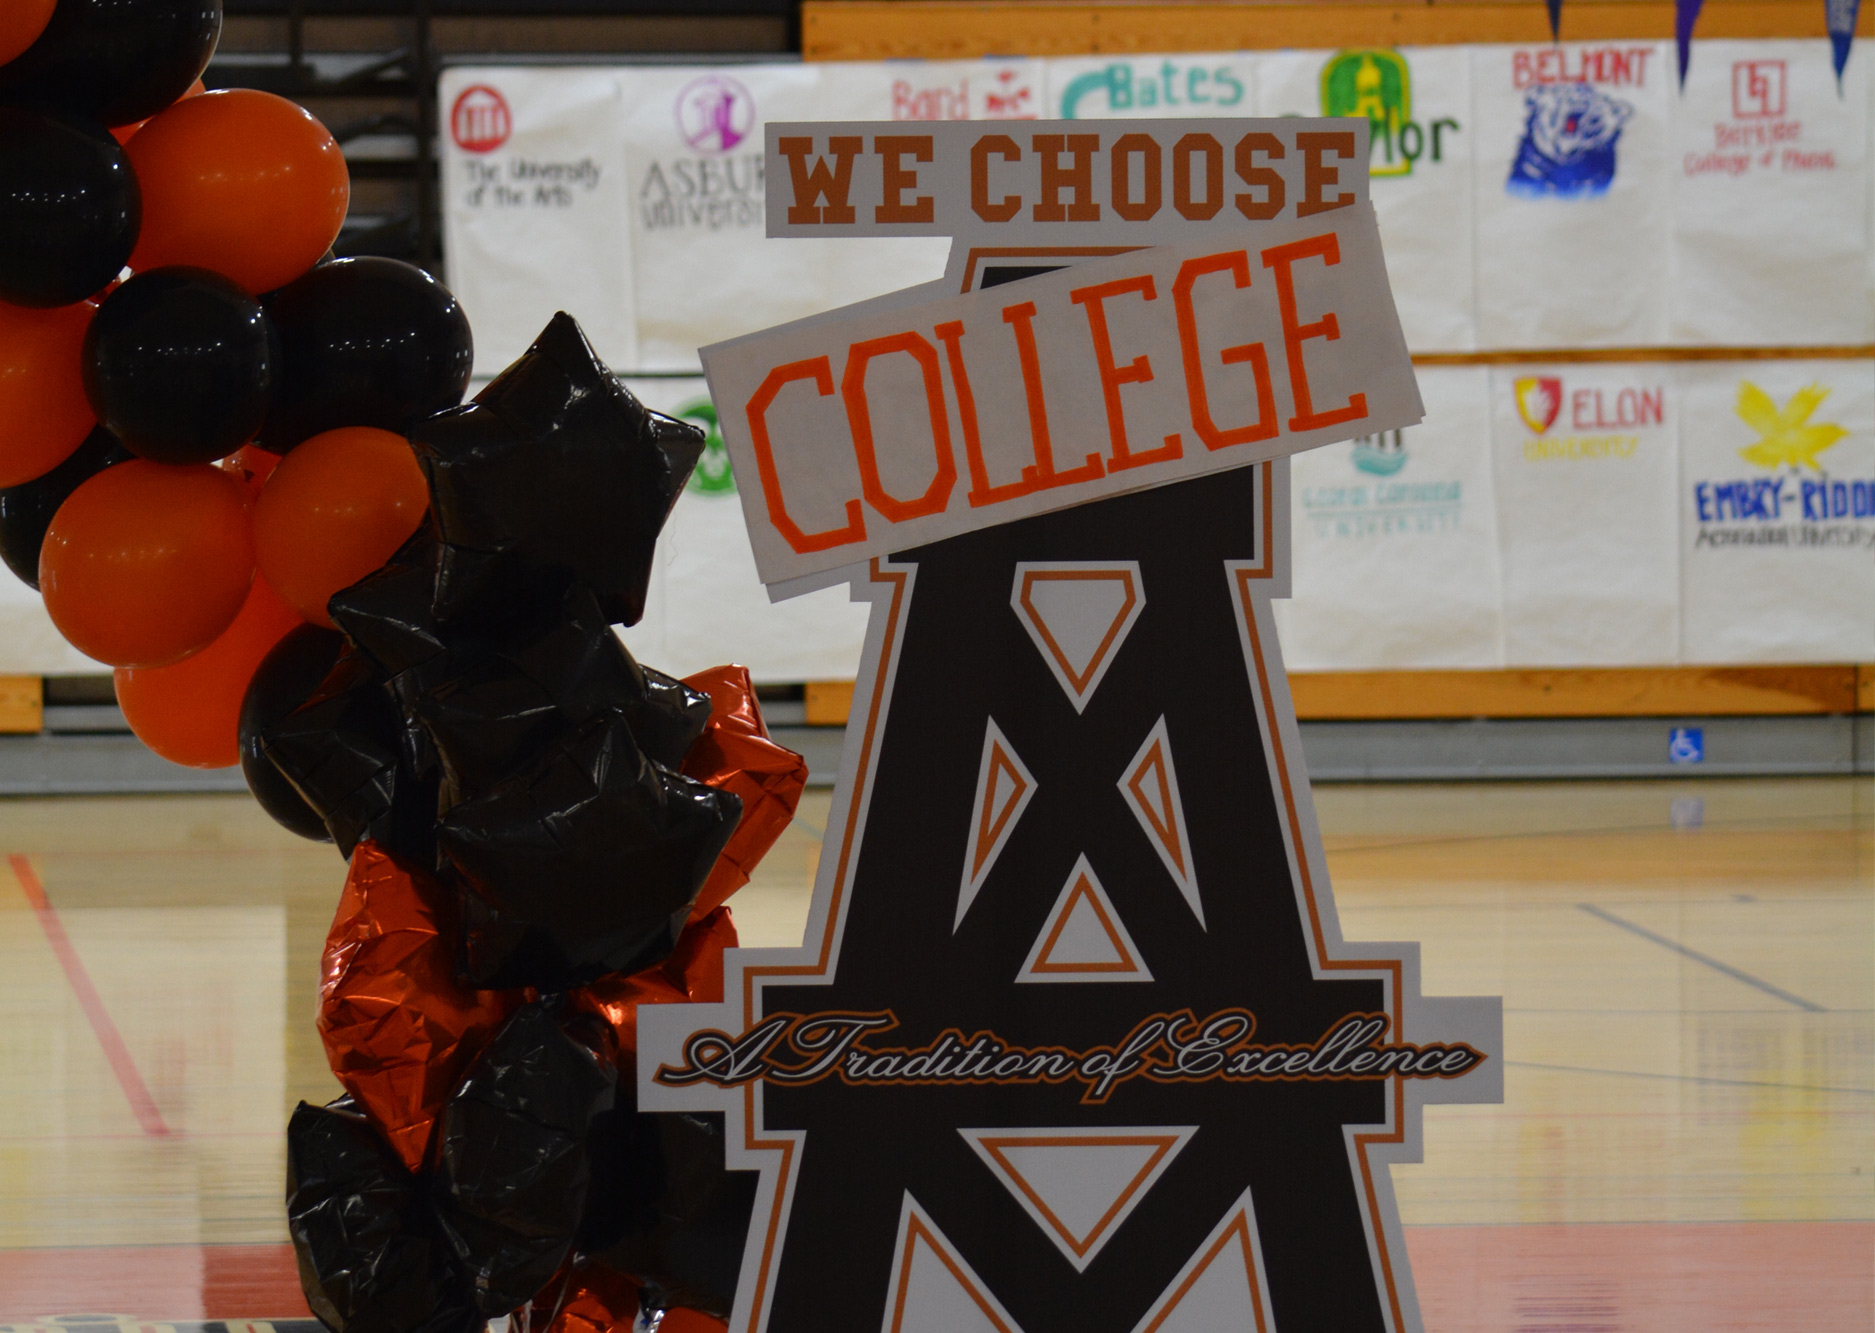 College4Careers College Counseling 12th Grade Senior High School photo of a banner we choose college 1